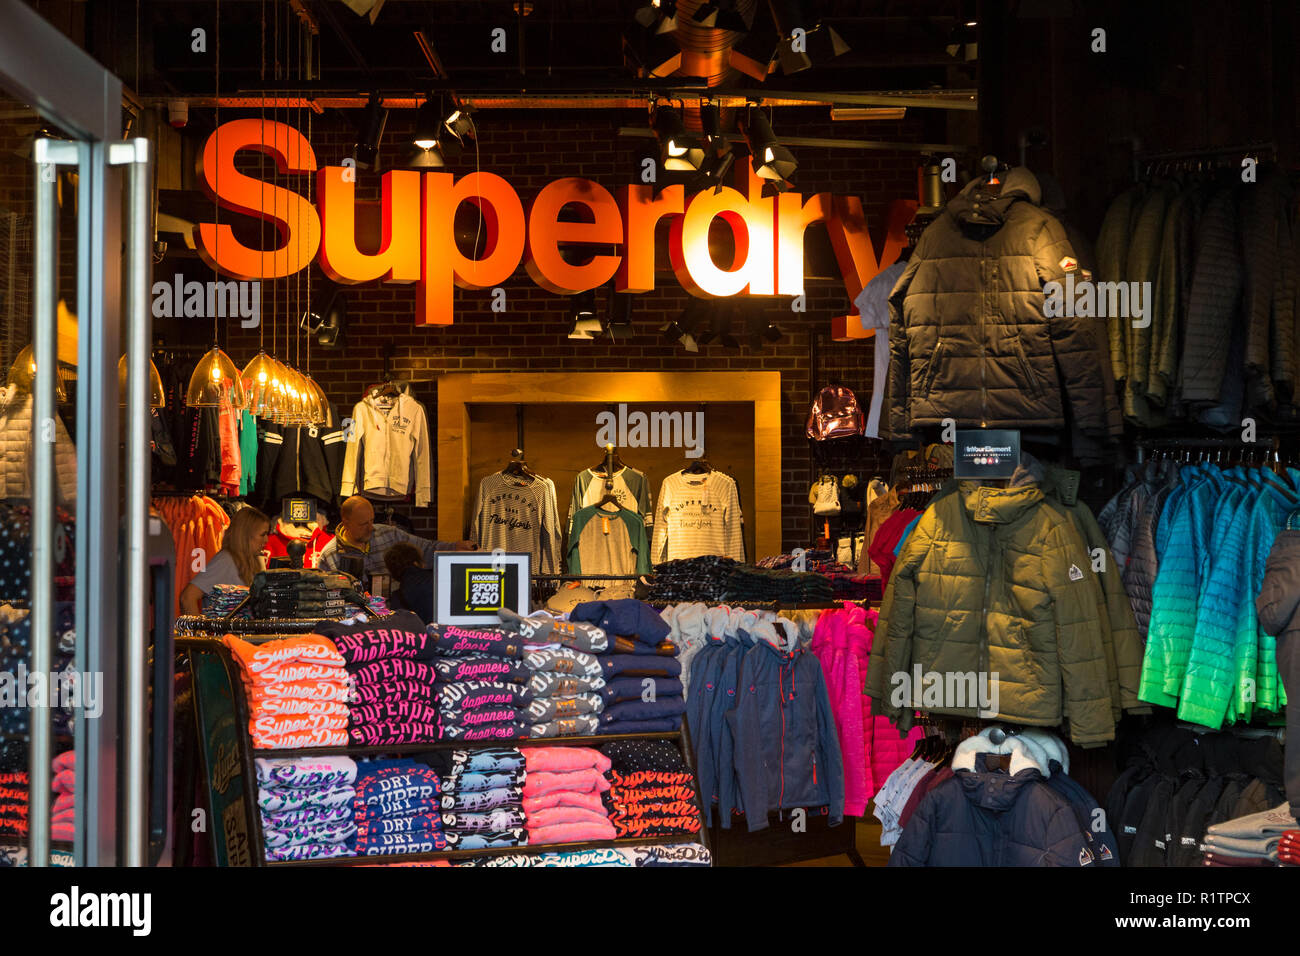 Superdry Clothing Store High Resolution Stock Photography and Images - Alamy